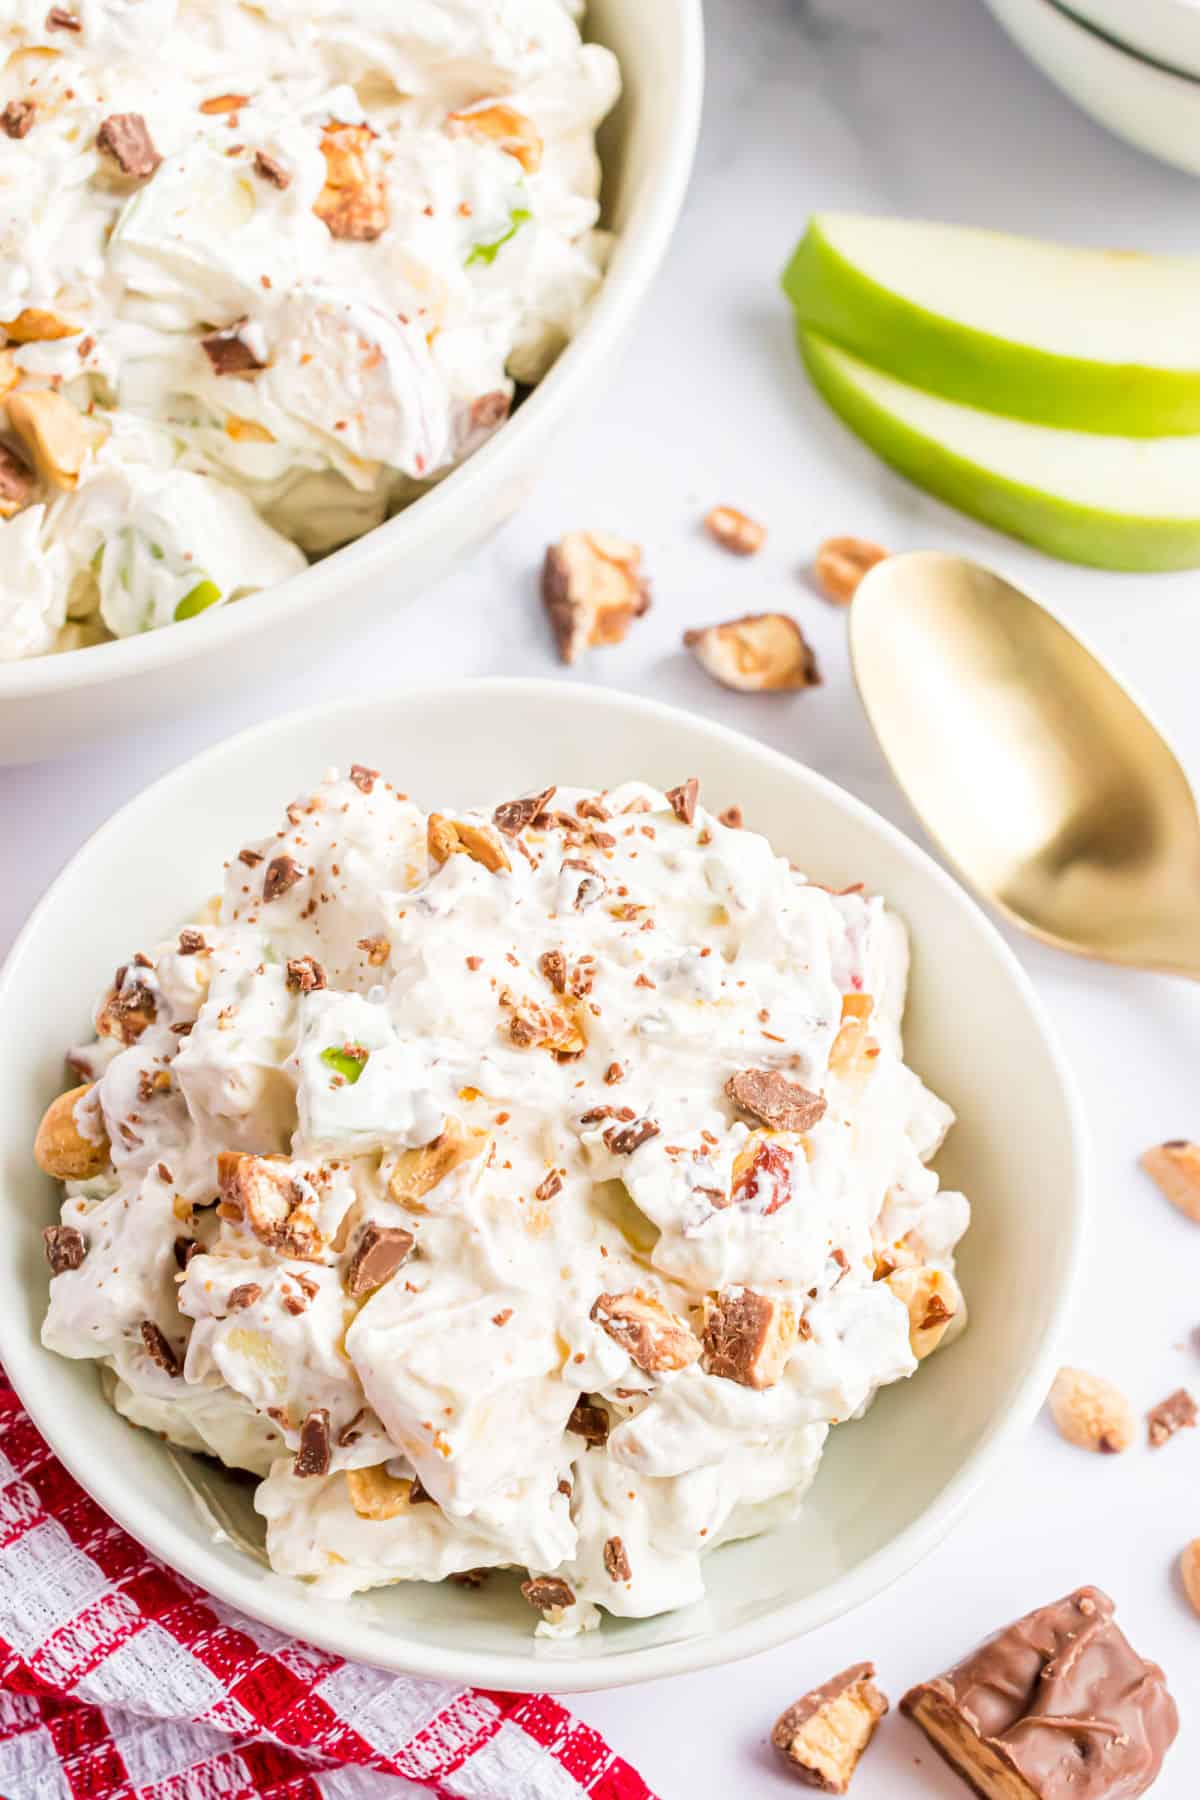 Apple salad with Snickers in a serving bowl with peanuts.